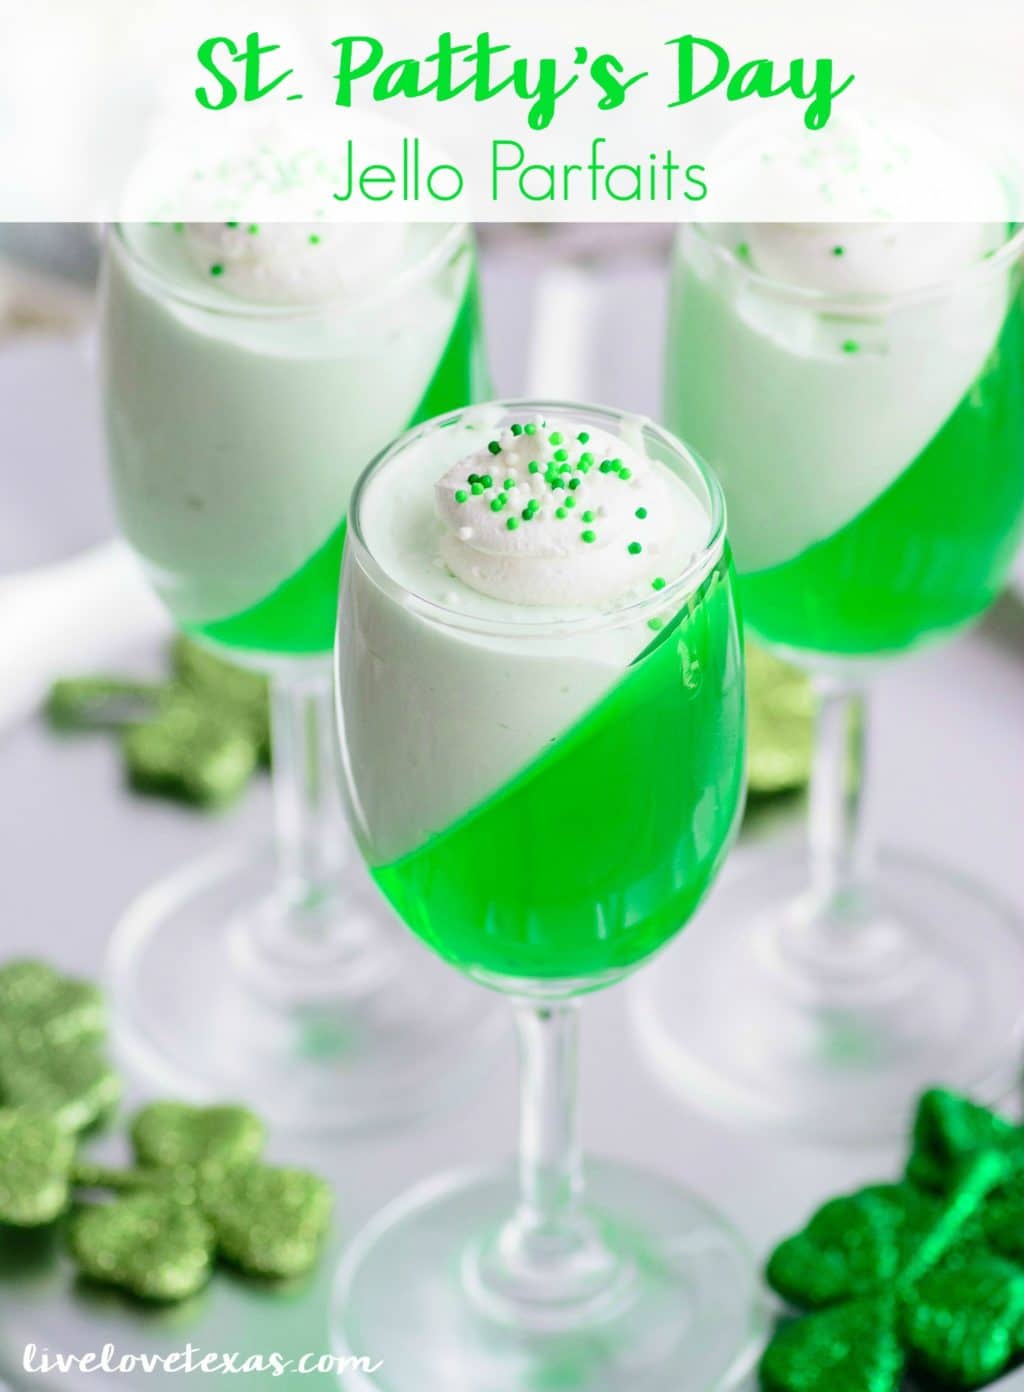 Jello Parfaits Recipe: Celebrate St Patty's Day with this Easy Dessert